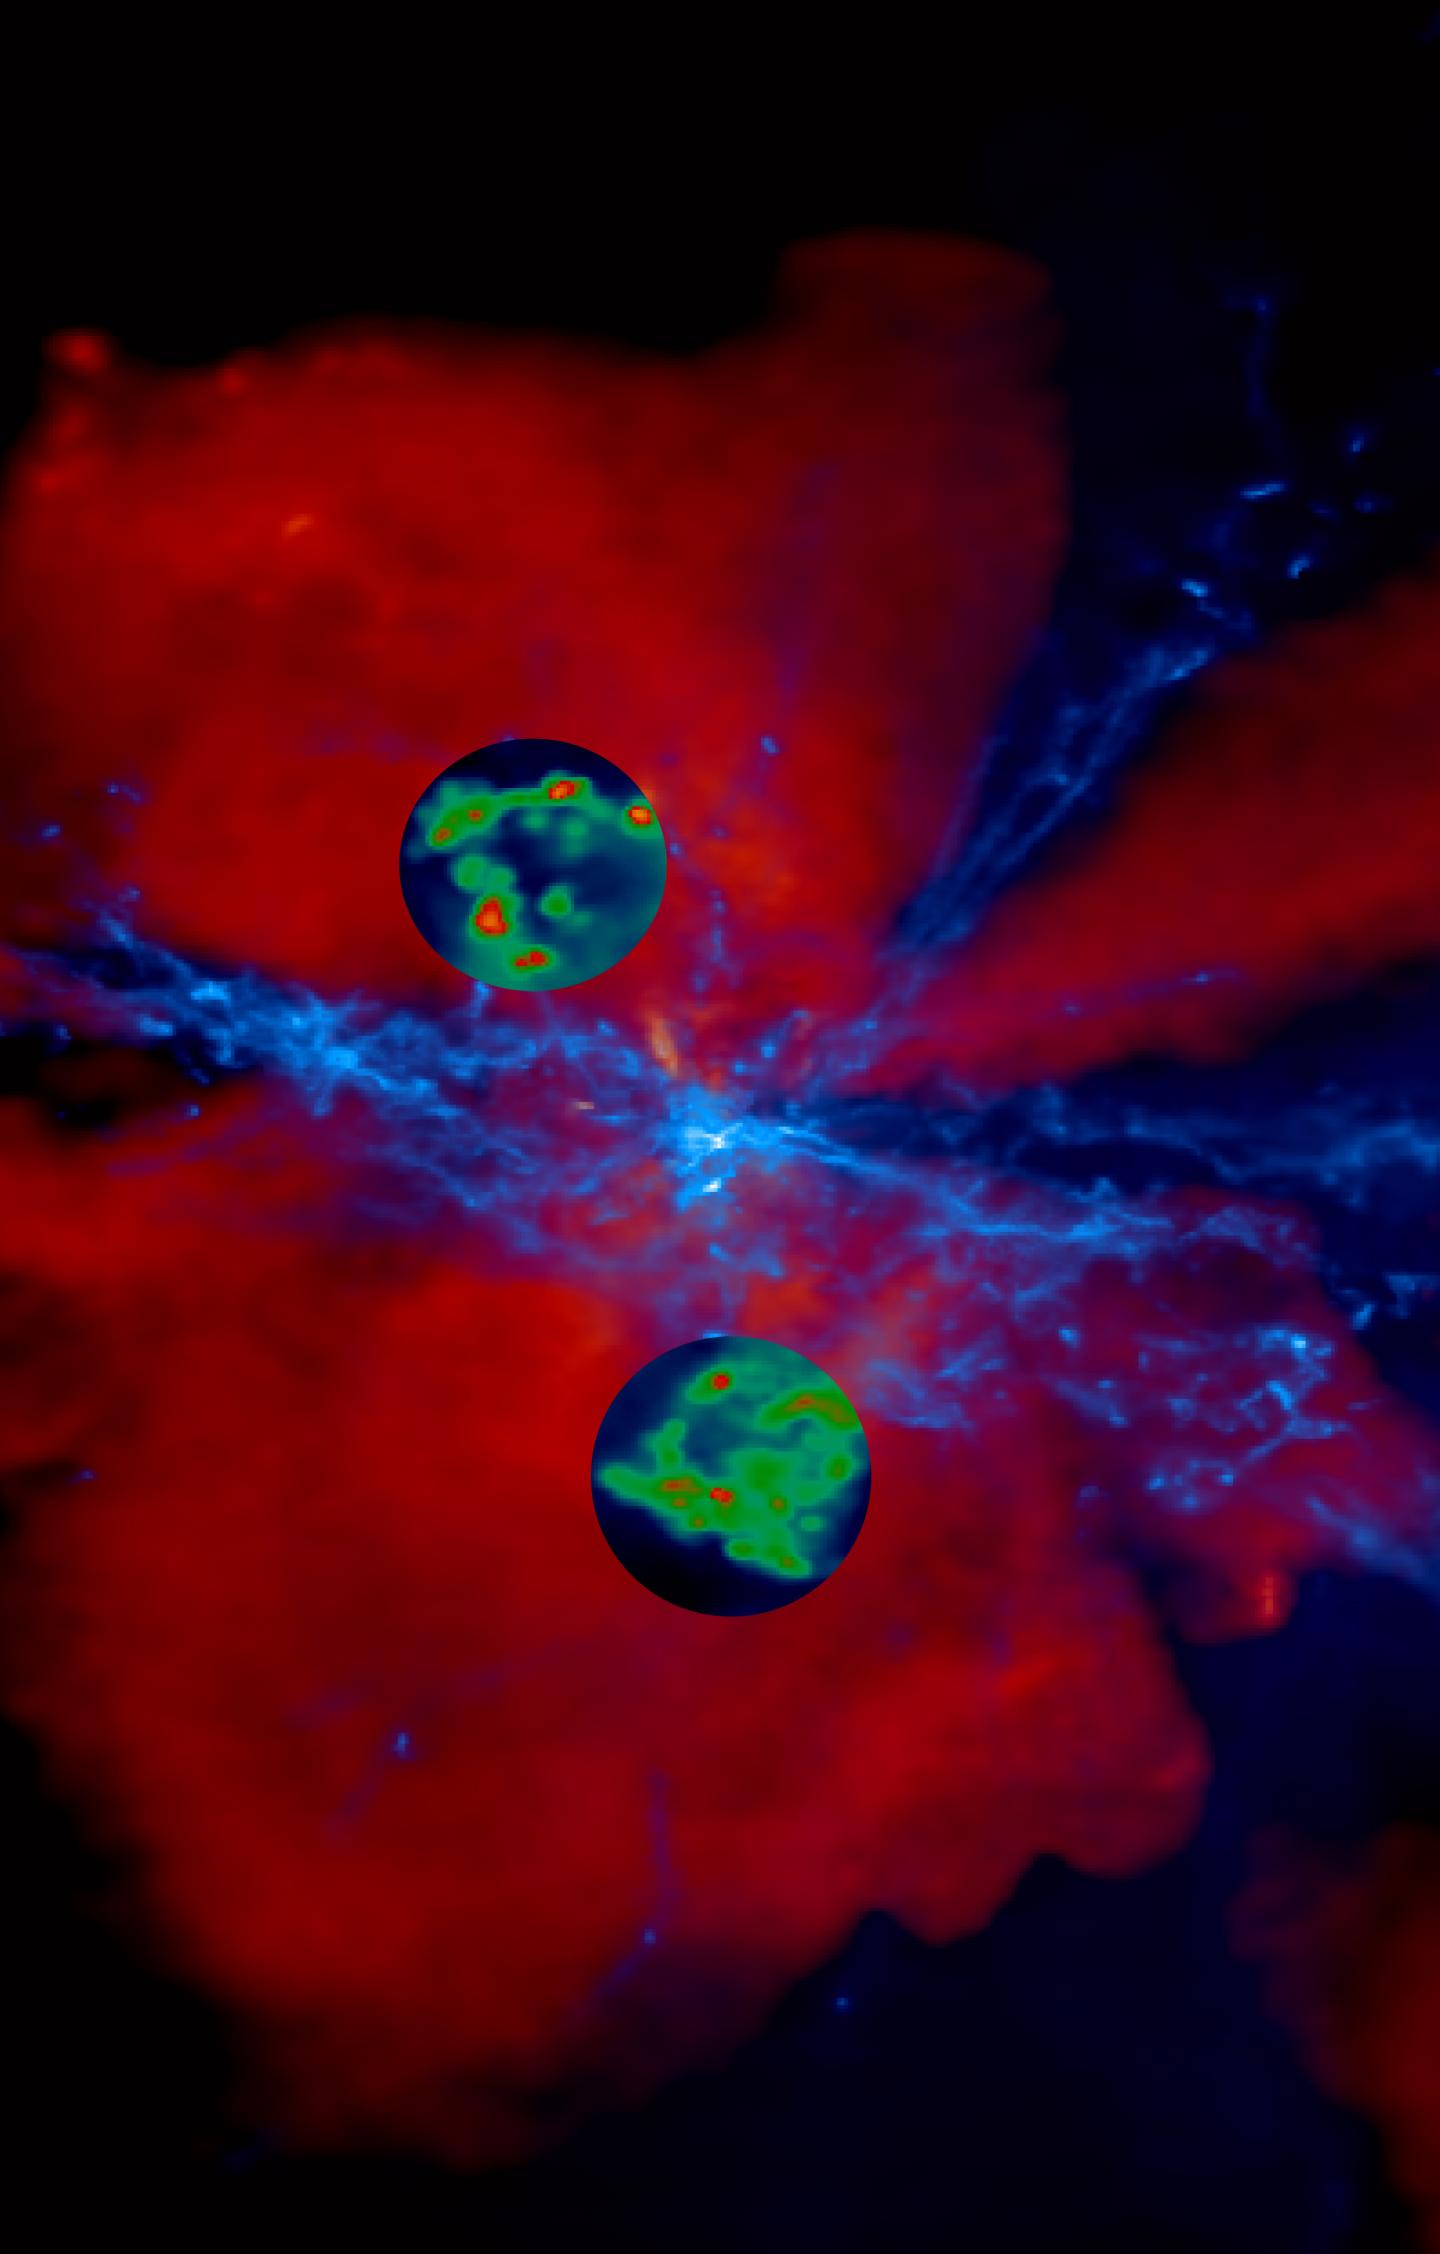 Simulated Outflow from a Quasar (1 of 2)